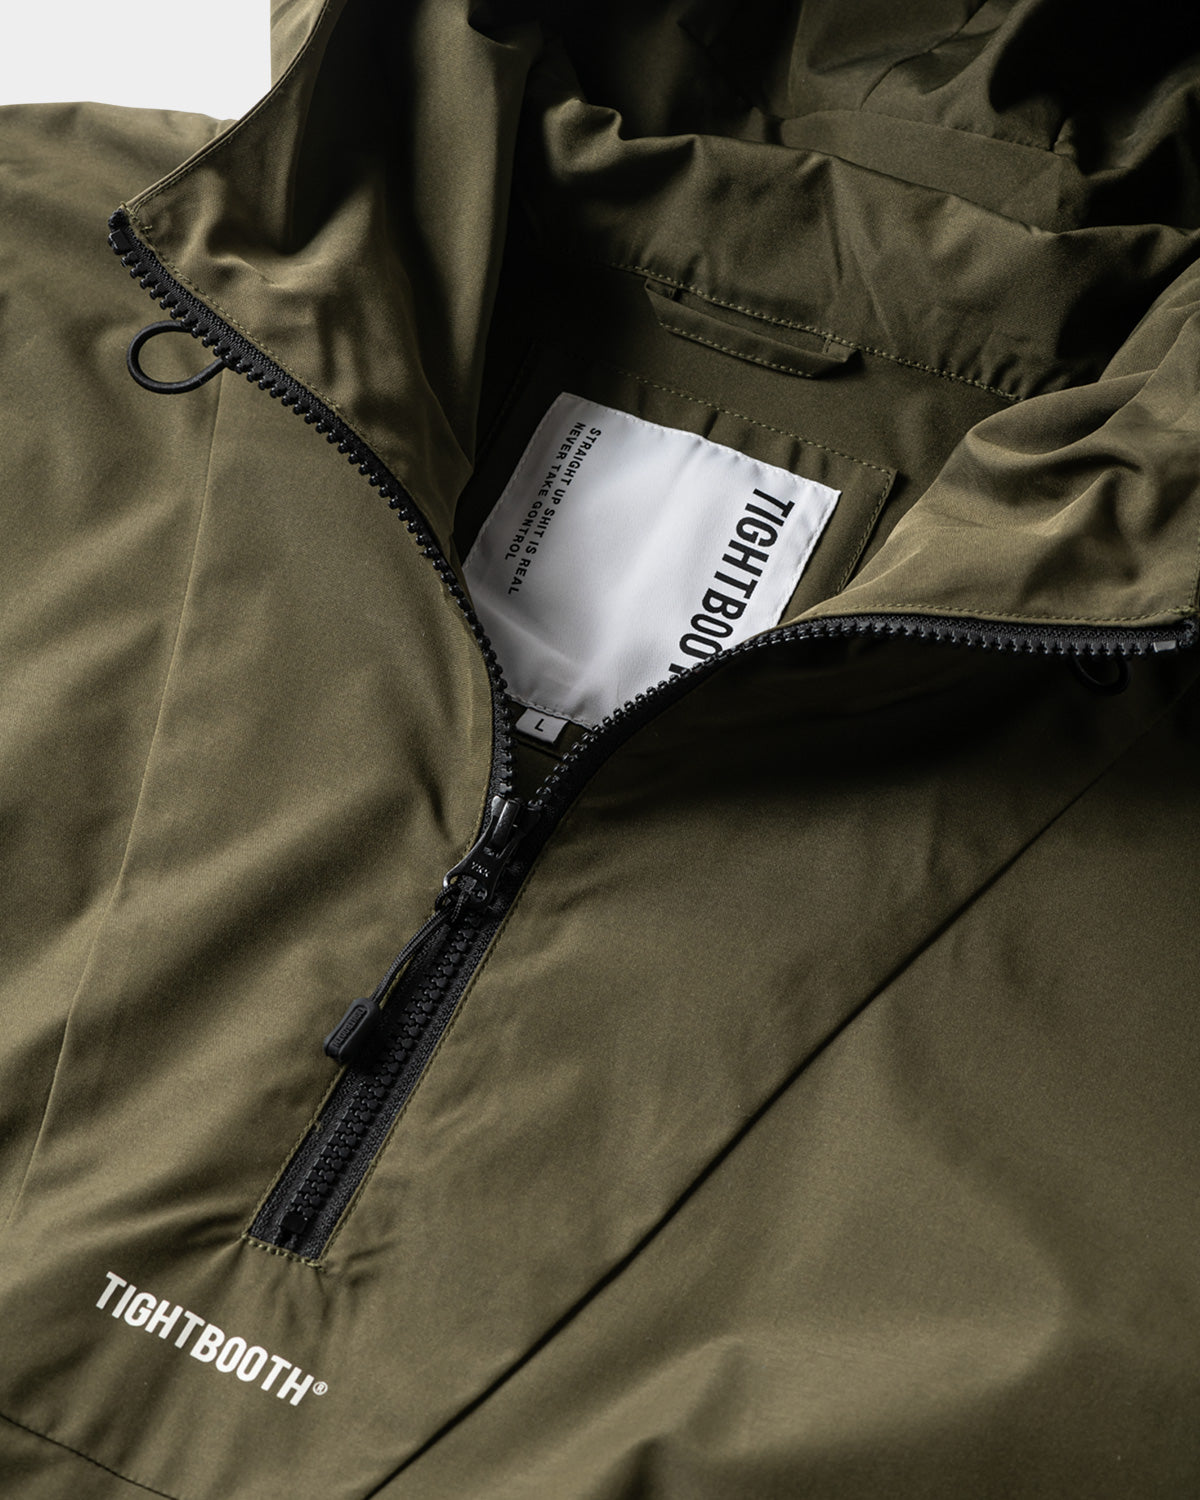 TIGHTBOOTH / LABEL ANORAK | JACK in the NET 公式通販